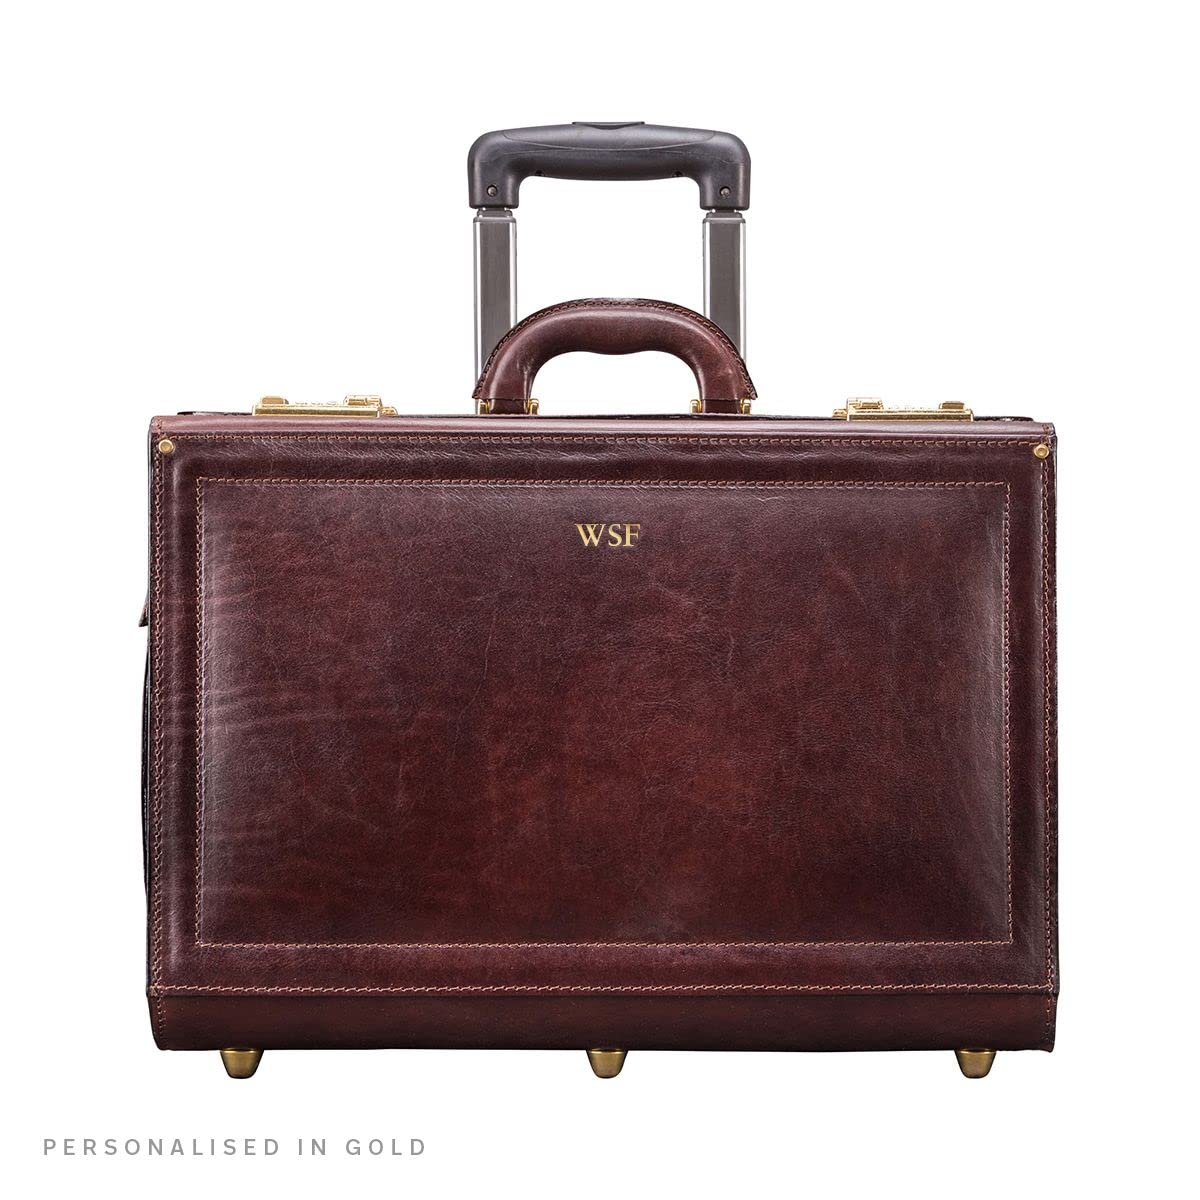 Maxwell Scott | Personalized Mens Luxury Leather Pilot/Catalog Attaché Case with Wheels | The VareseW | Classic Business Travel Bag | Dark Chocolate Brown